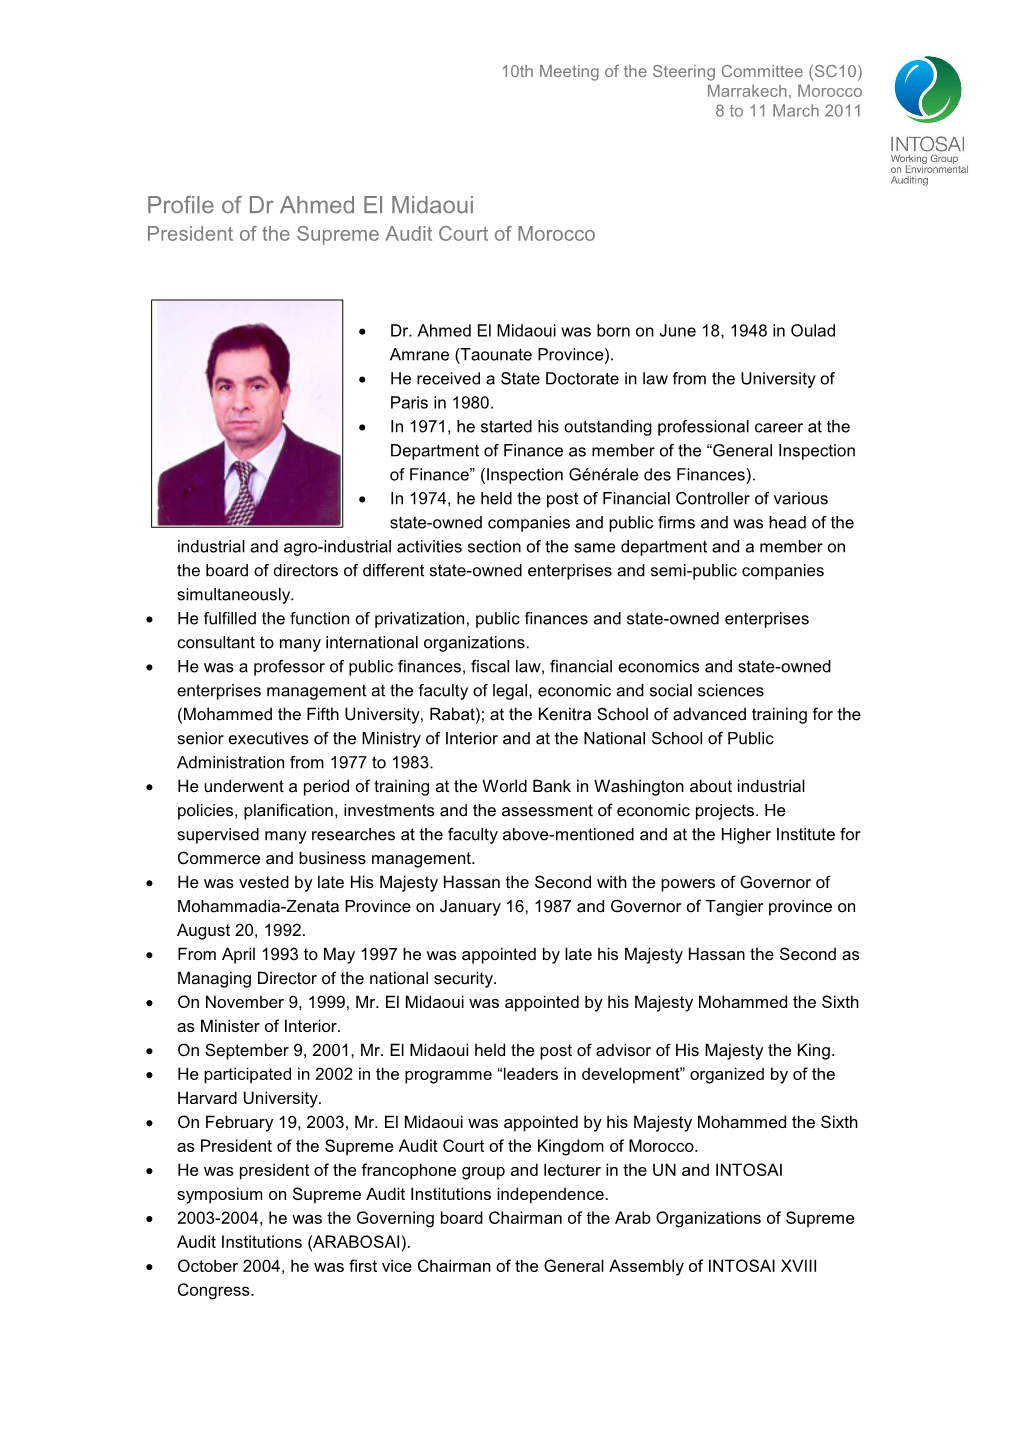 Profile of Dr Ahmed El Midaoui President of the Supreme Audit Court of Morocco